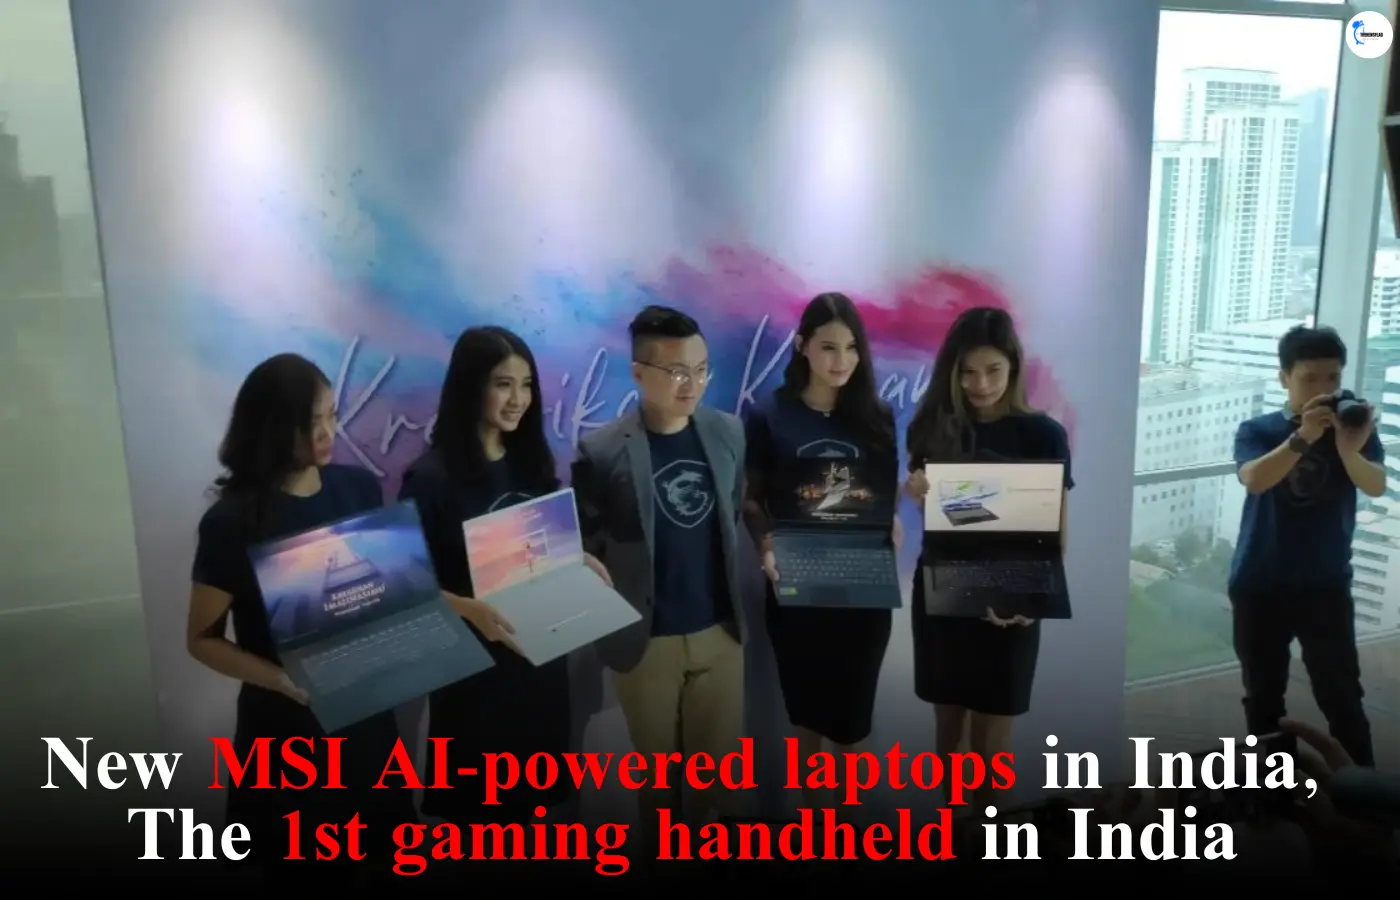 New MSI AI-powered laptops in India, The 1st gaming handheld in India